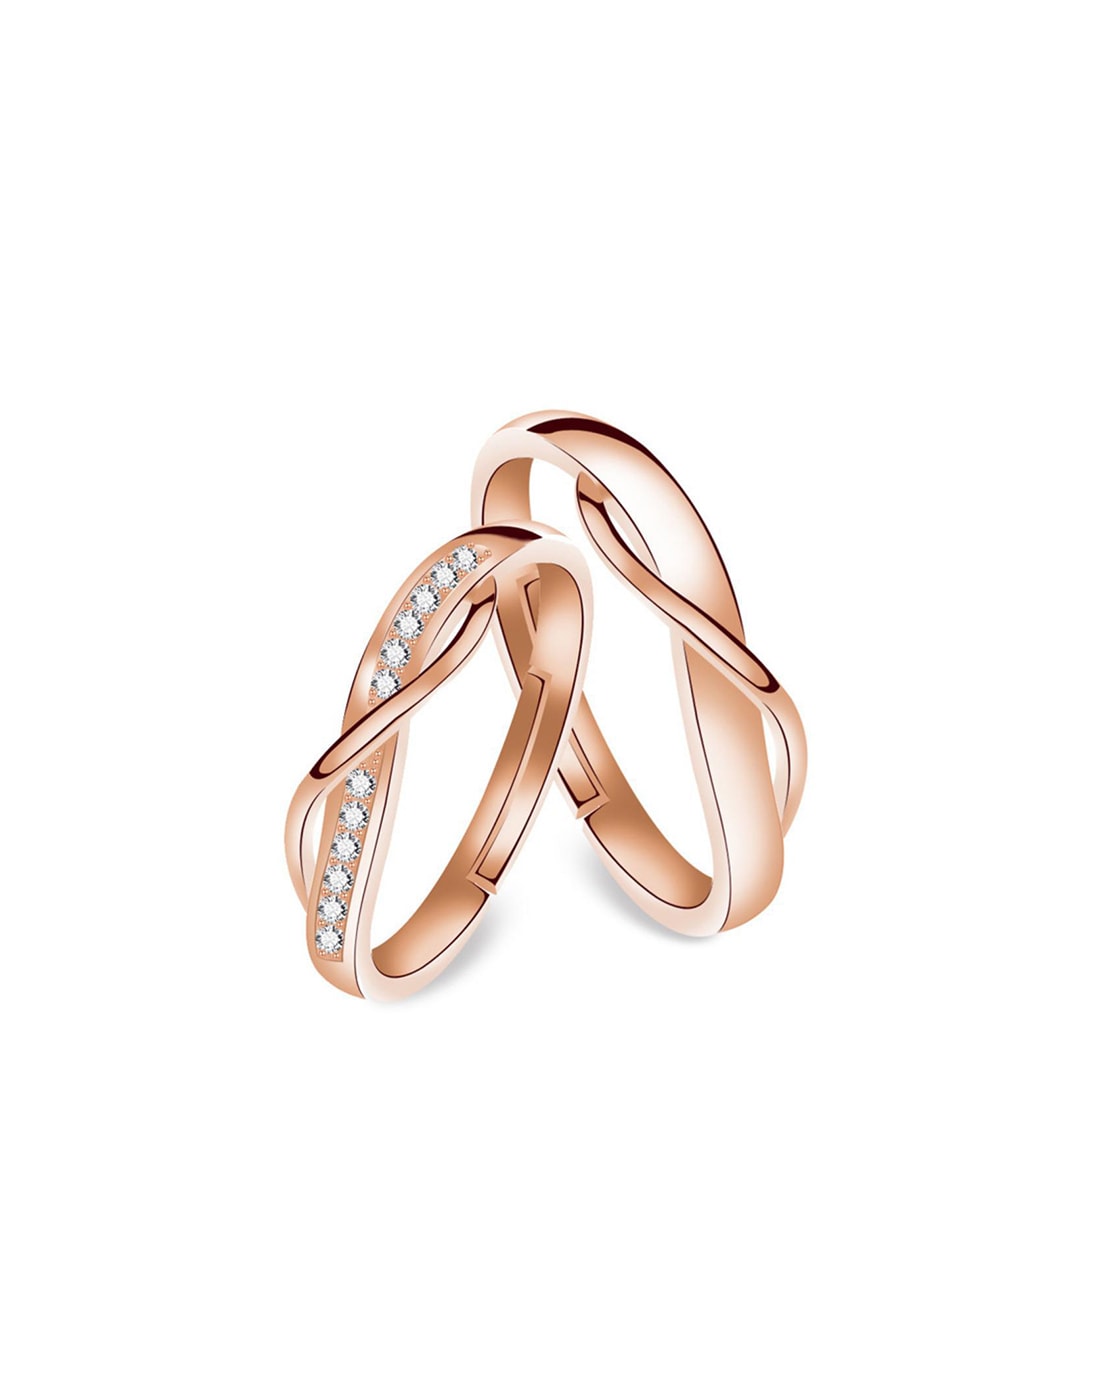 Matching Rings Couple Ring Rose Gold Plated 1CT Heart CZ Women Wedding Ring  Sets Female - Walmart.com